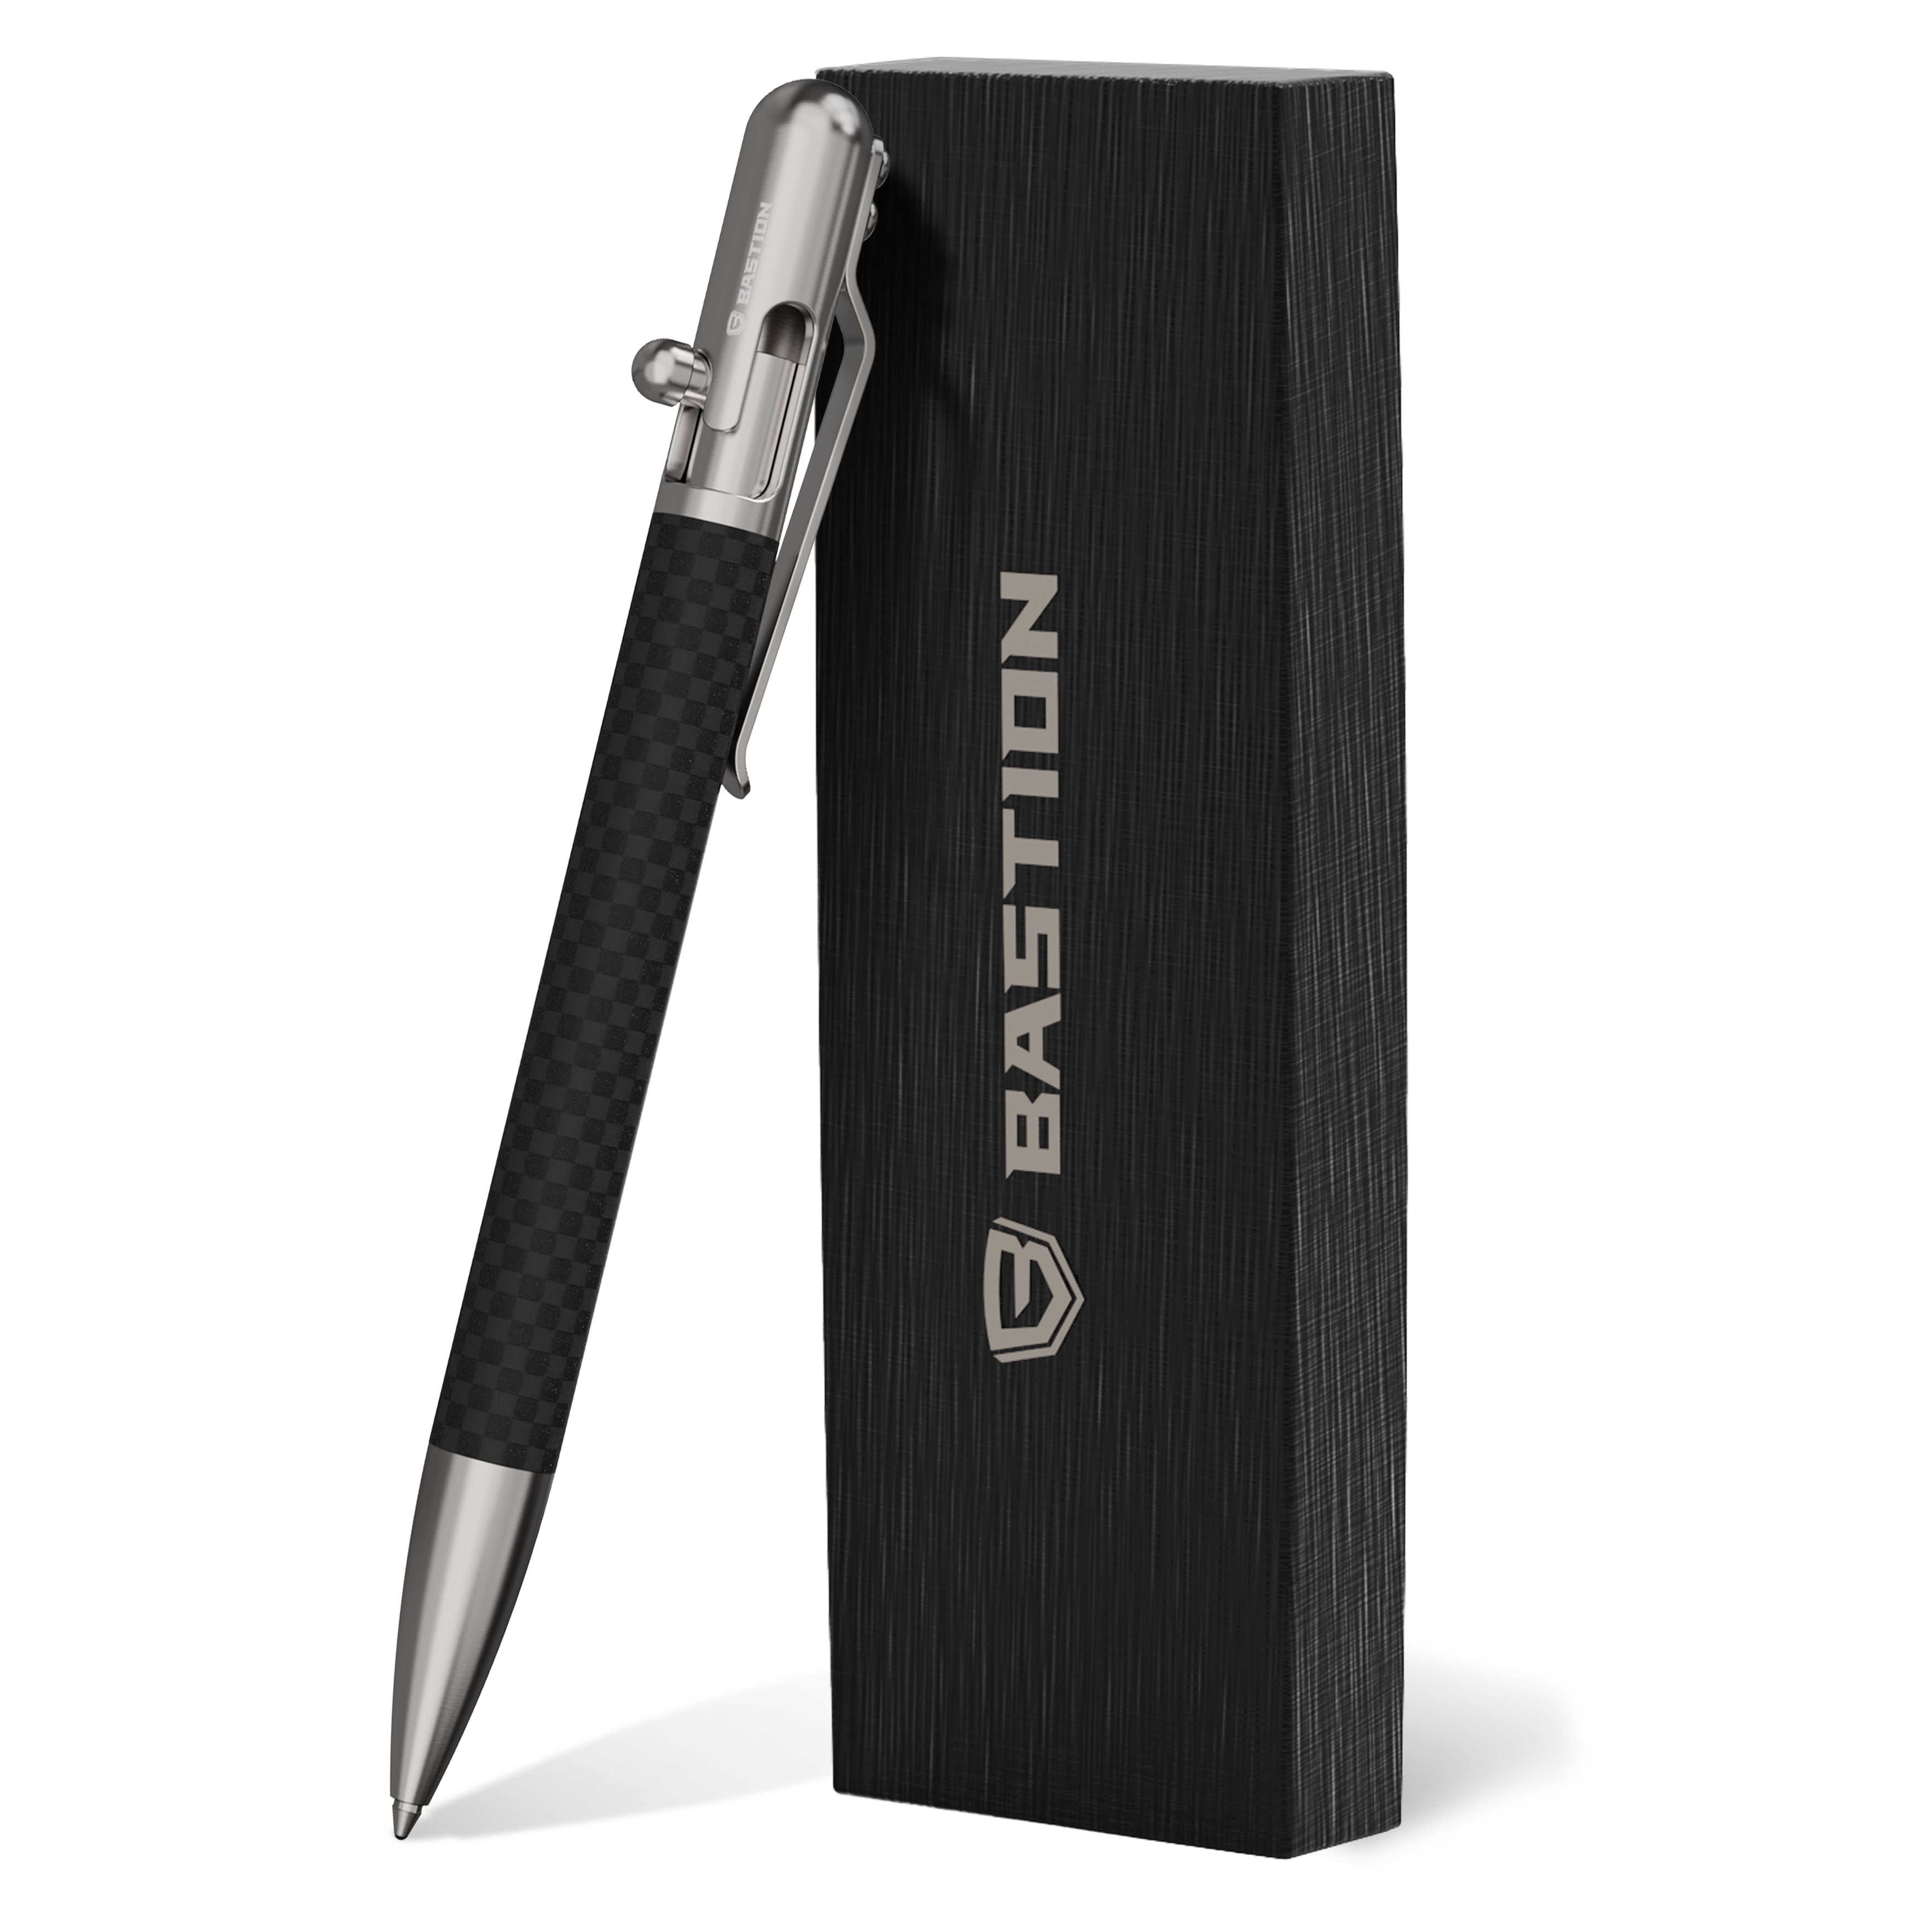 Carbon Fiber and Stainless Steel - Slim Bolt Action Pen by Bastion®